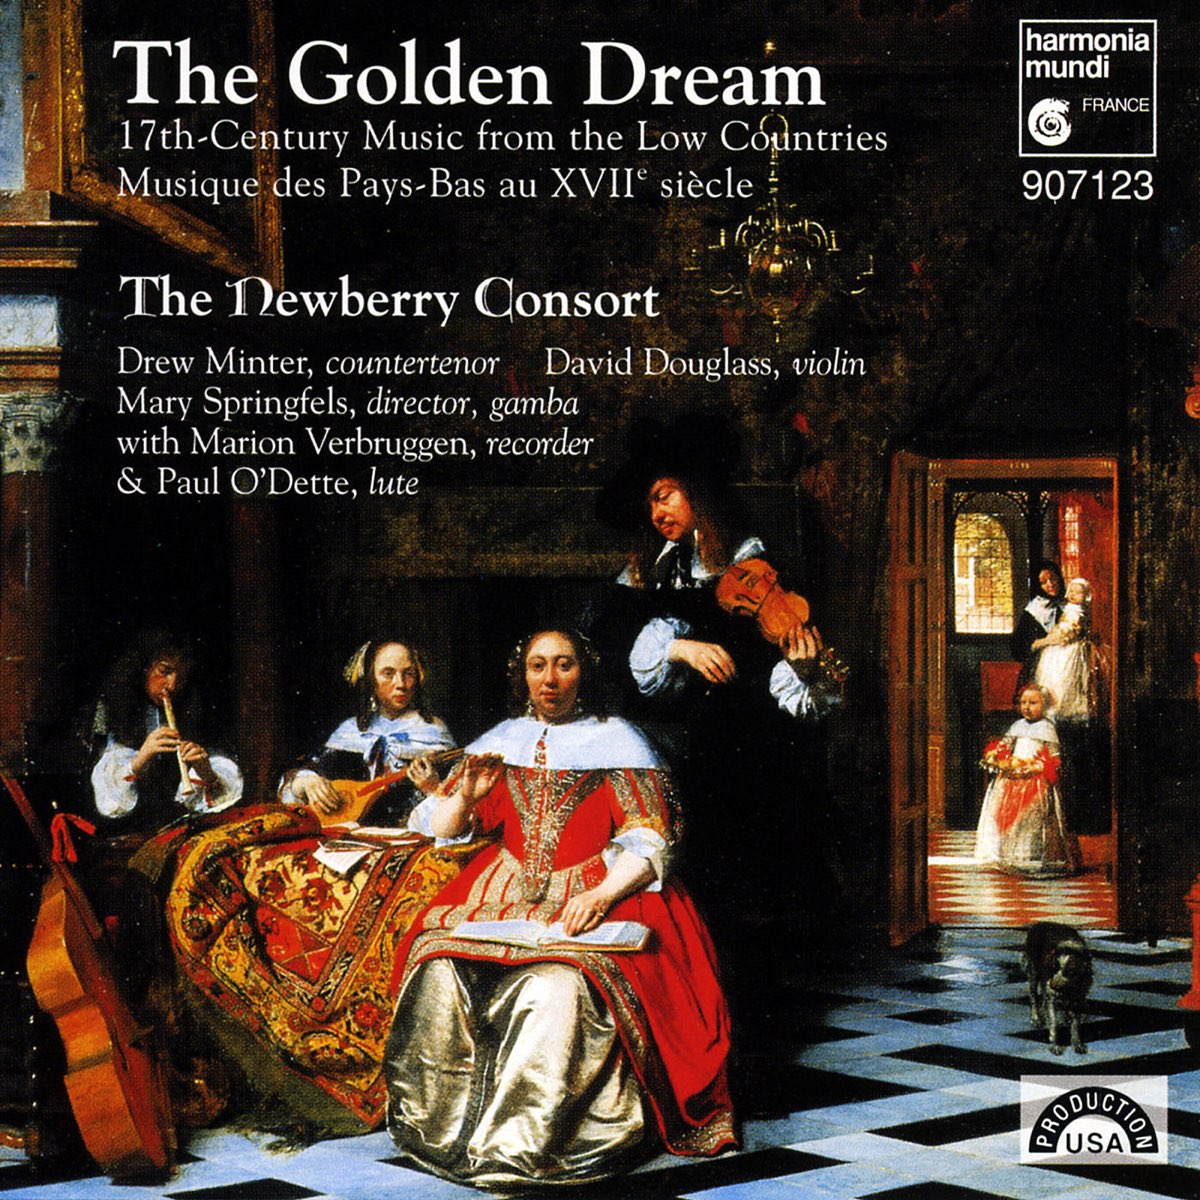 The Golden Dream (17th Century Music from the Low Countries) - Album by  Newberry Consort, Marion Verbruggen, Mary Springfels & Paul O'Dette - Apple  Music